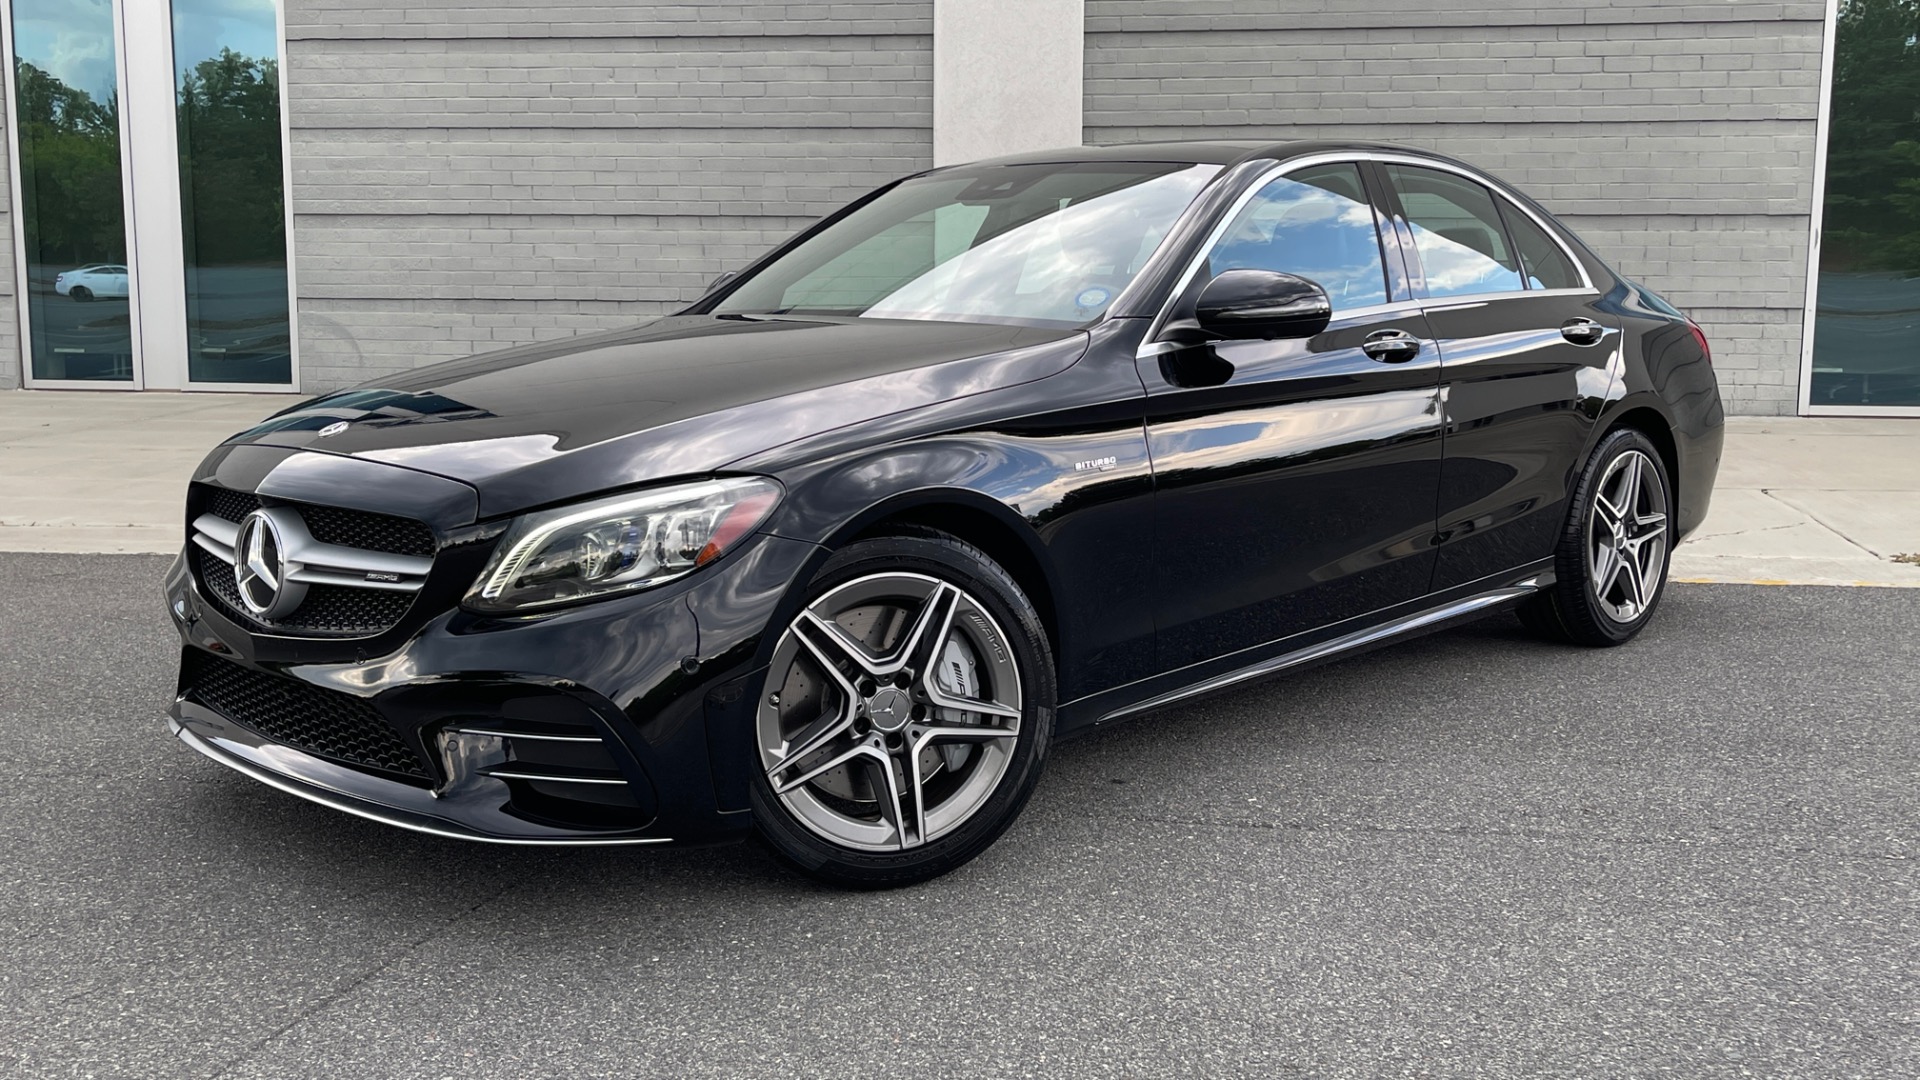 Used 2020 Mercedes-Benz C-CLASS AMG C43 4MATIC / PARK ASST / PANO-ROOF / LIGHTING / REARVIEW for sale $60,595 at Formula Imports in Charlotte NC 28227 1